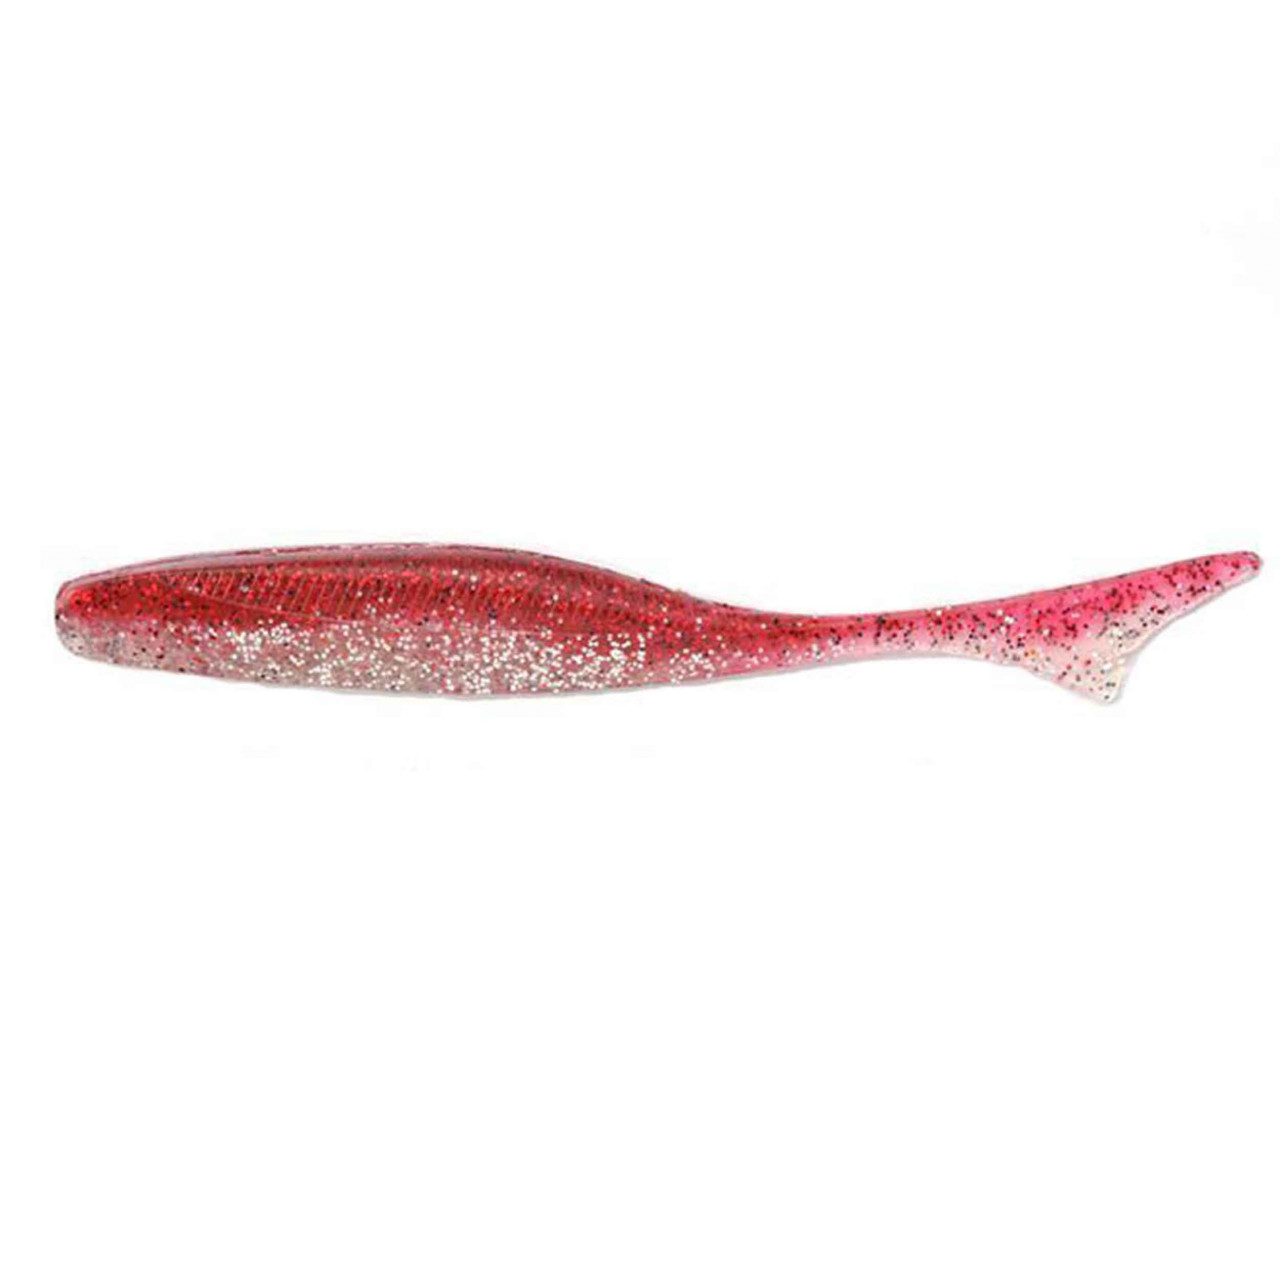 Shad MMT Owner Getnet Juster Fish 89mm 40 Flash Red